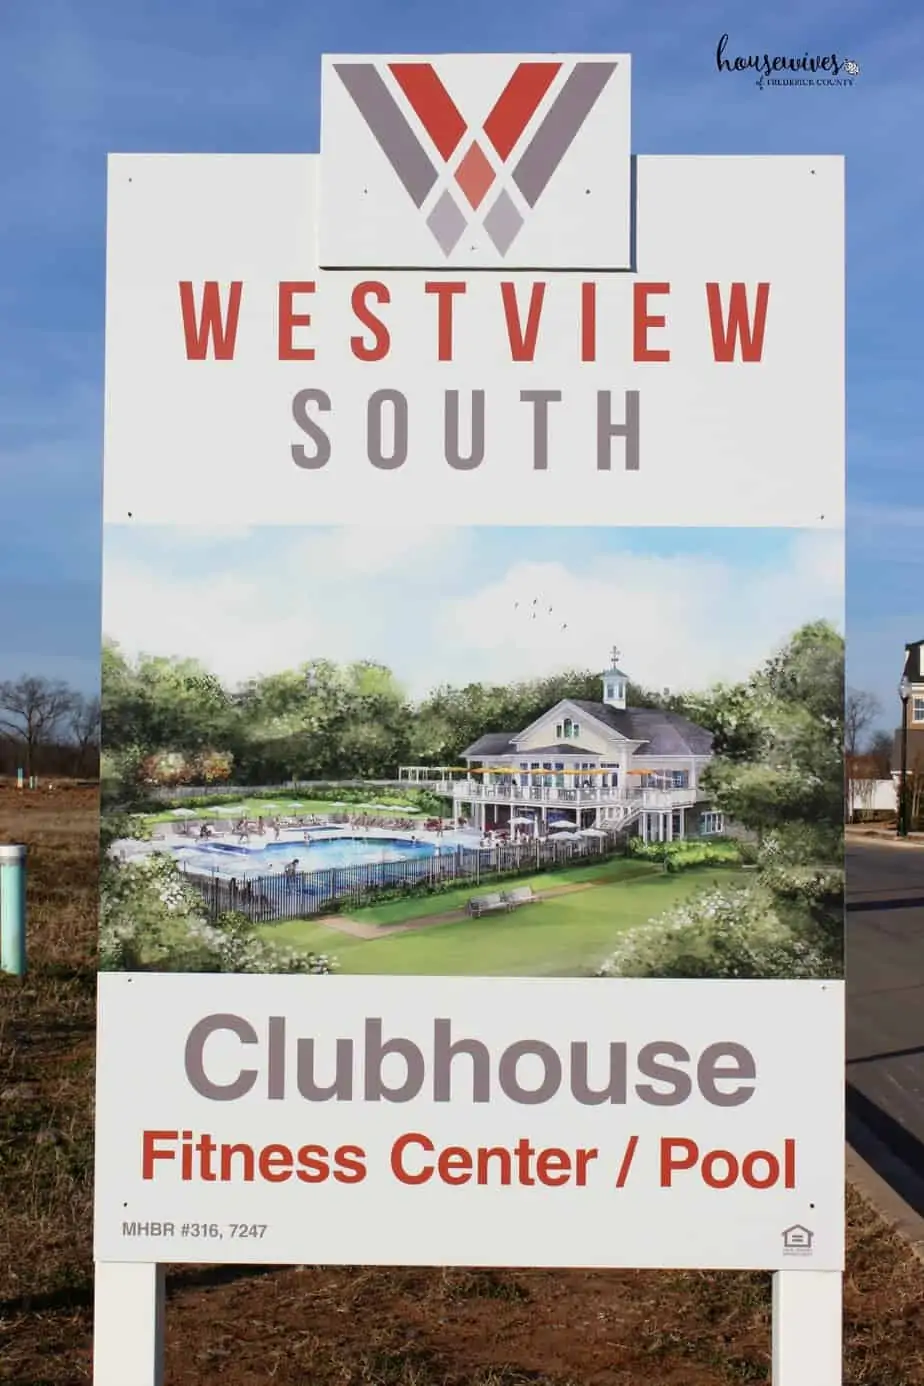 Lennar Westview South: Clubhouse, Fitness Center & Pool